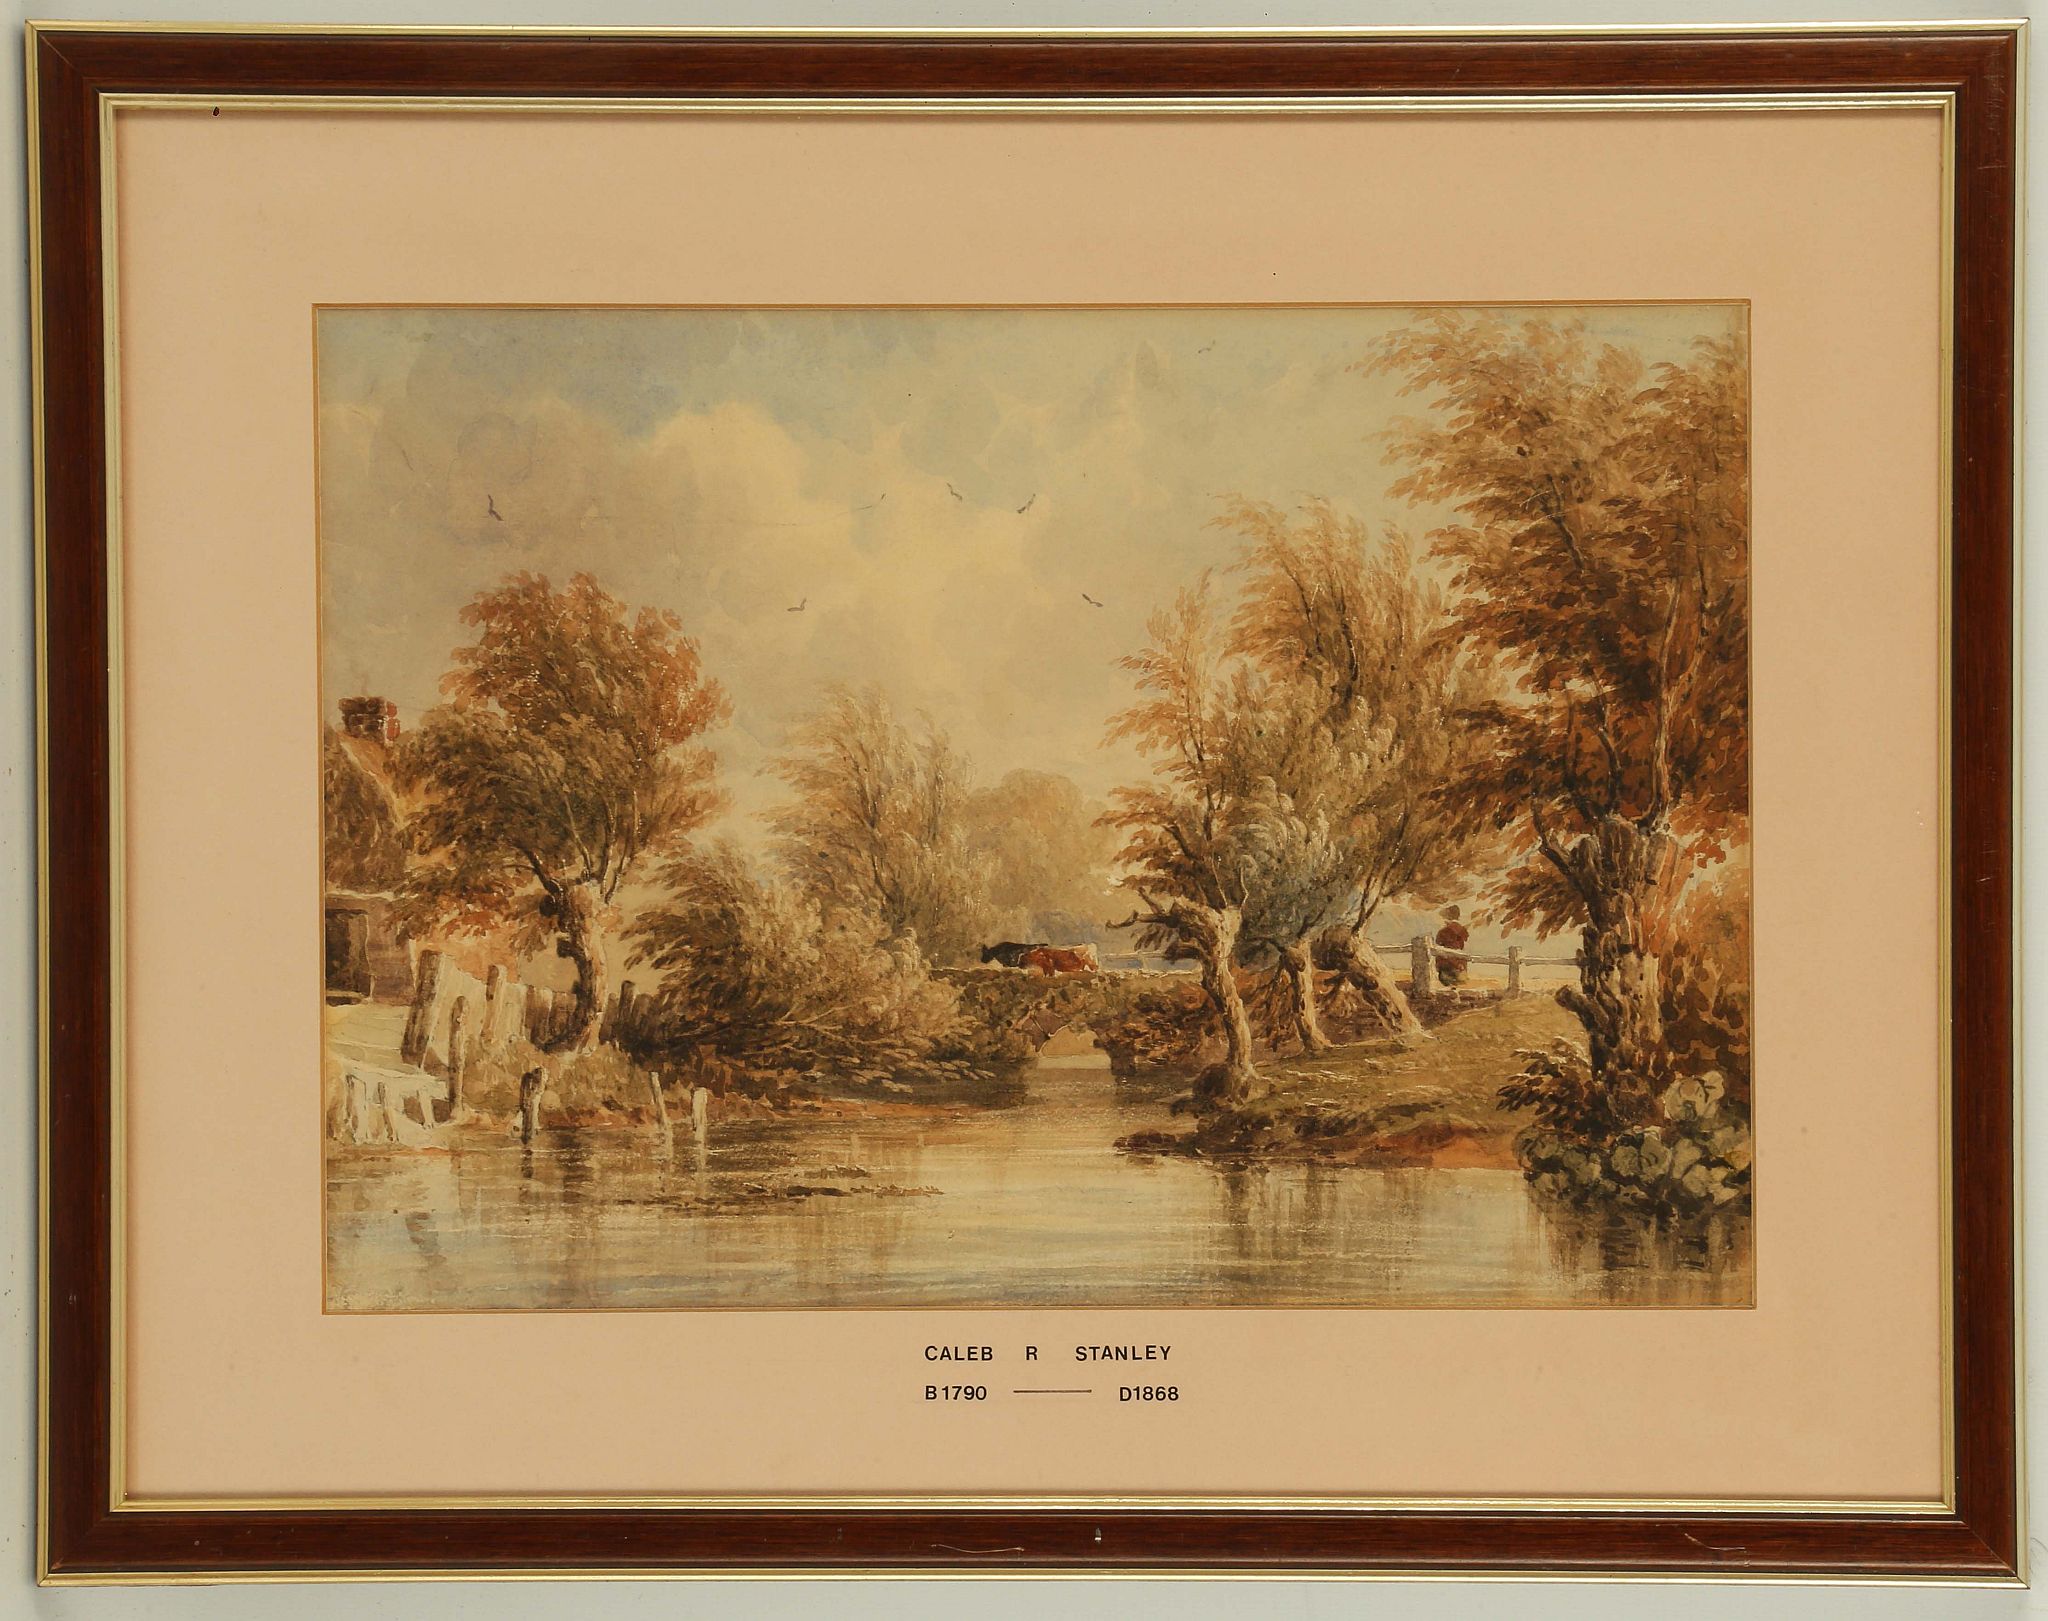 An interesting selection of watercolour works: Caleb Robert Stanley 1790-1868. 'River Landscape'